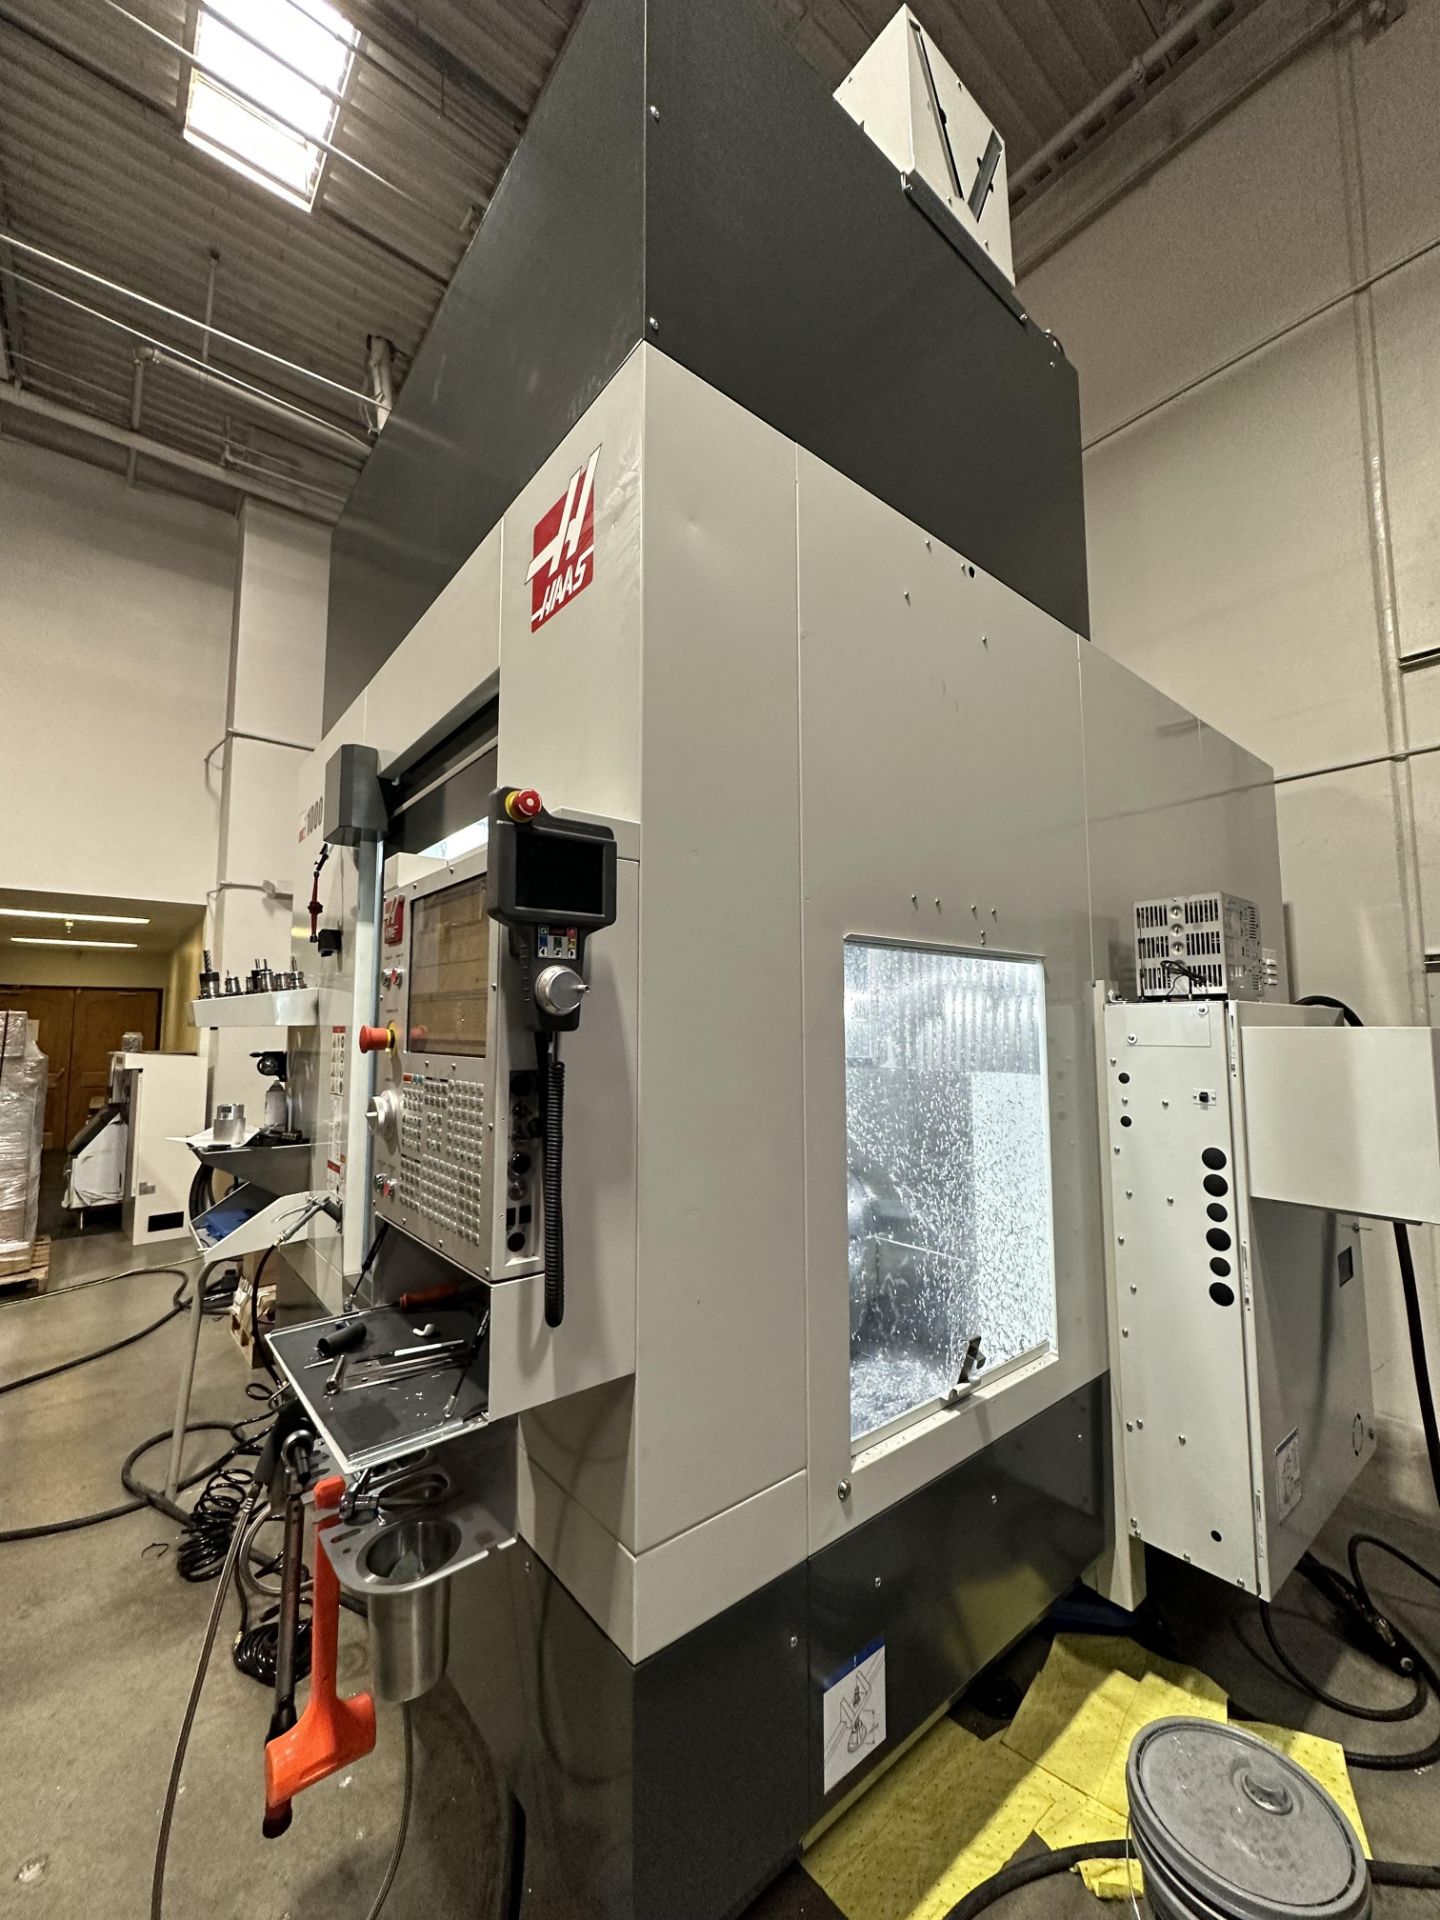 2022 HAAS UMC-1000 5-Axis 15,000 RPM Machining Center ***Under 750 Cutting Hours*** - Image 5 of 42